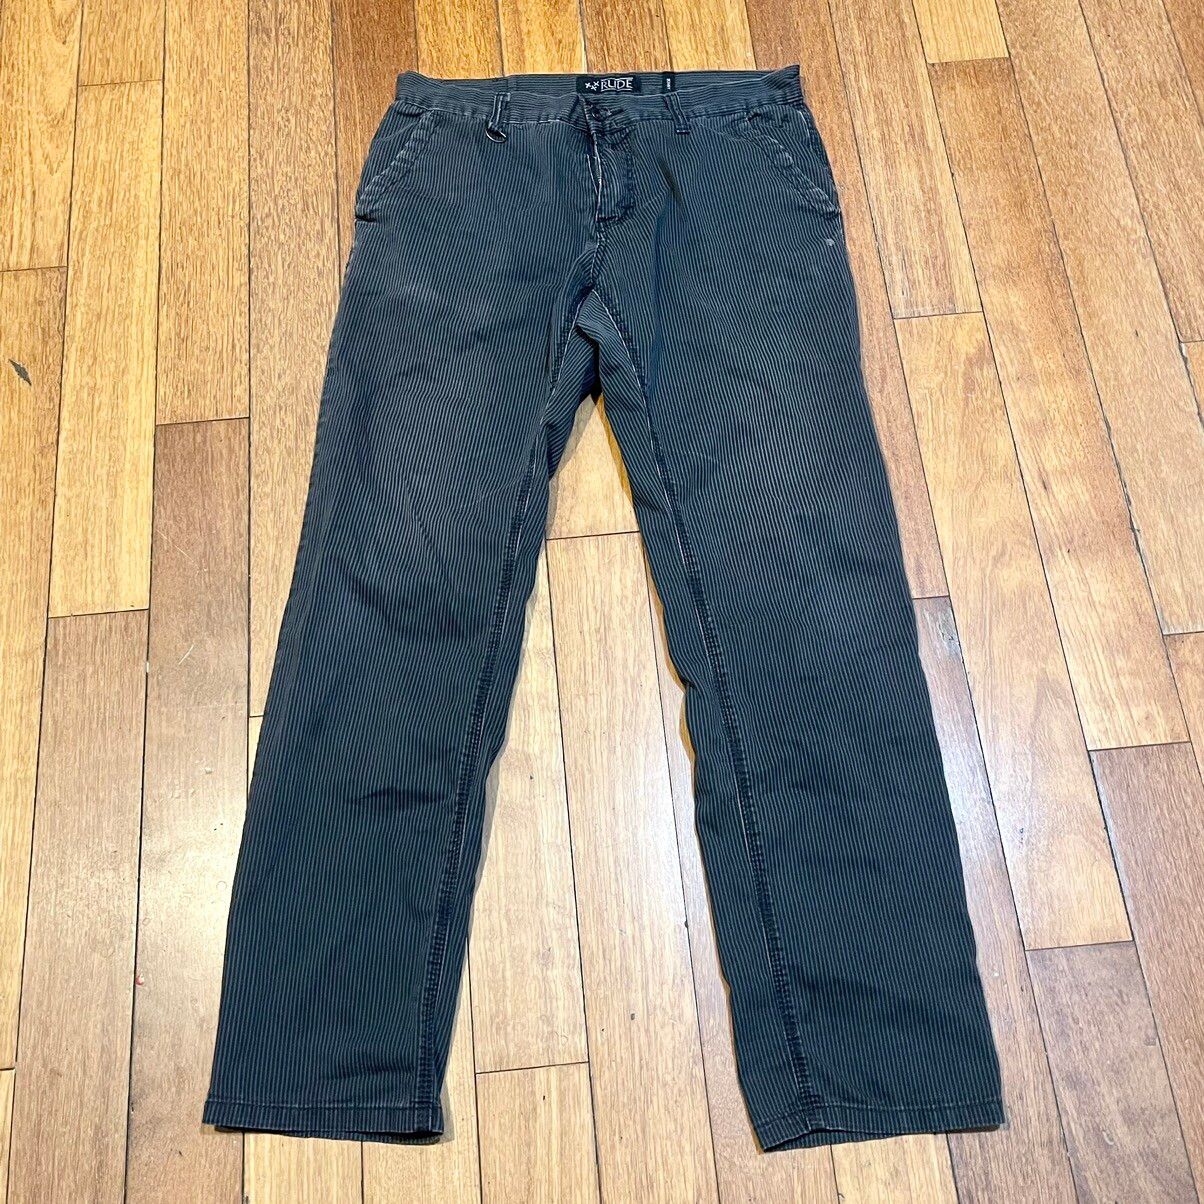 Vintage BLACK AND GREY STRIPED XXX RUDE PANTS! | Grailed